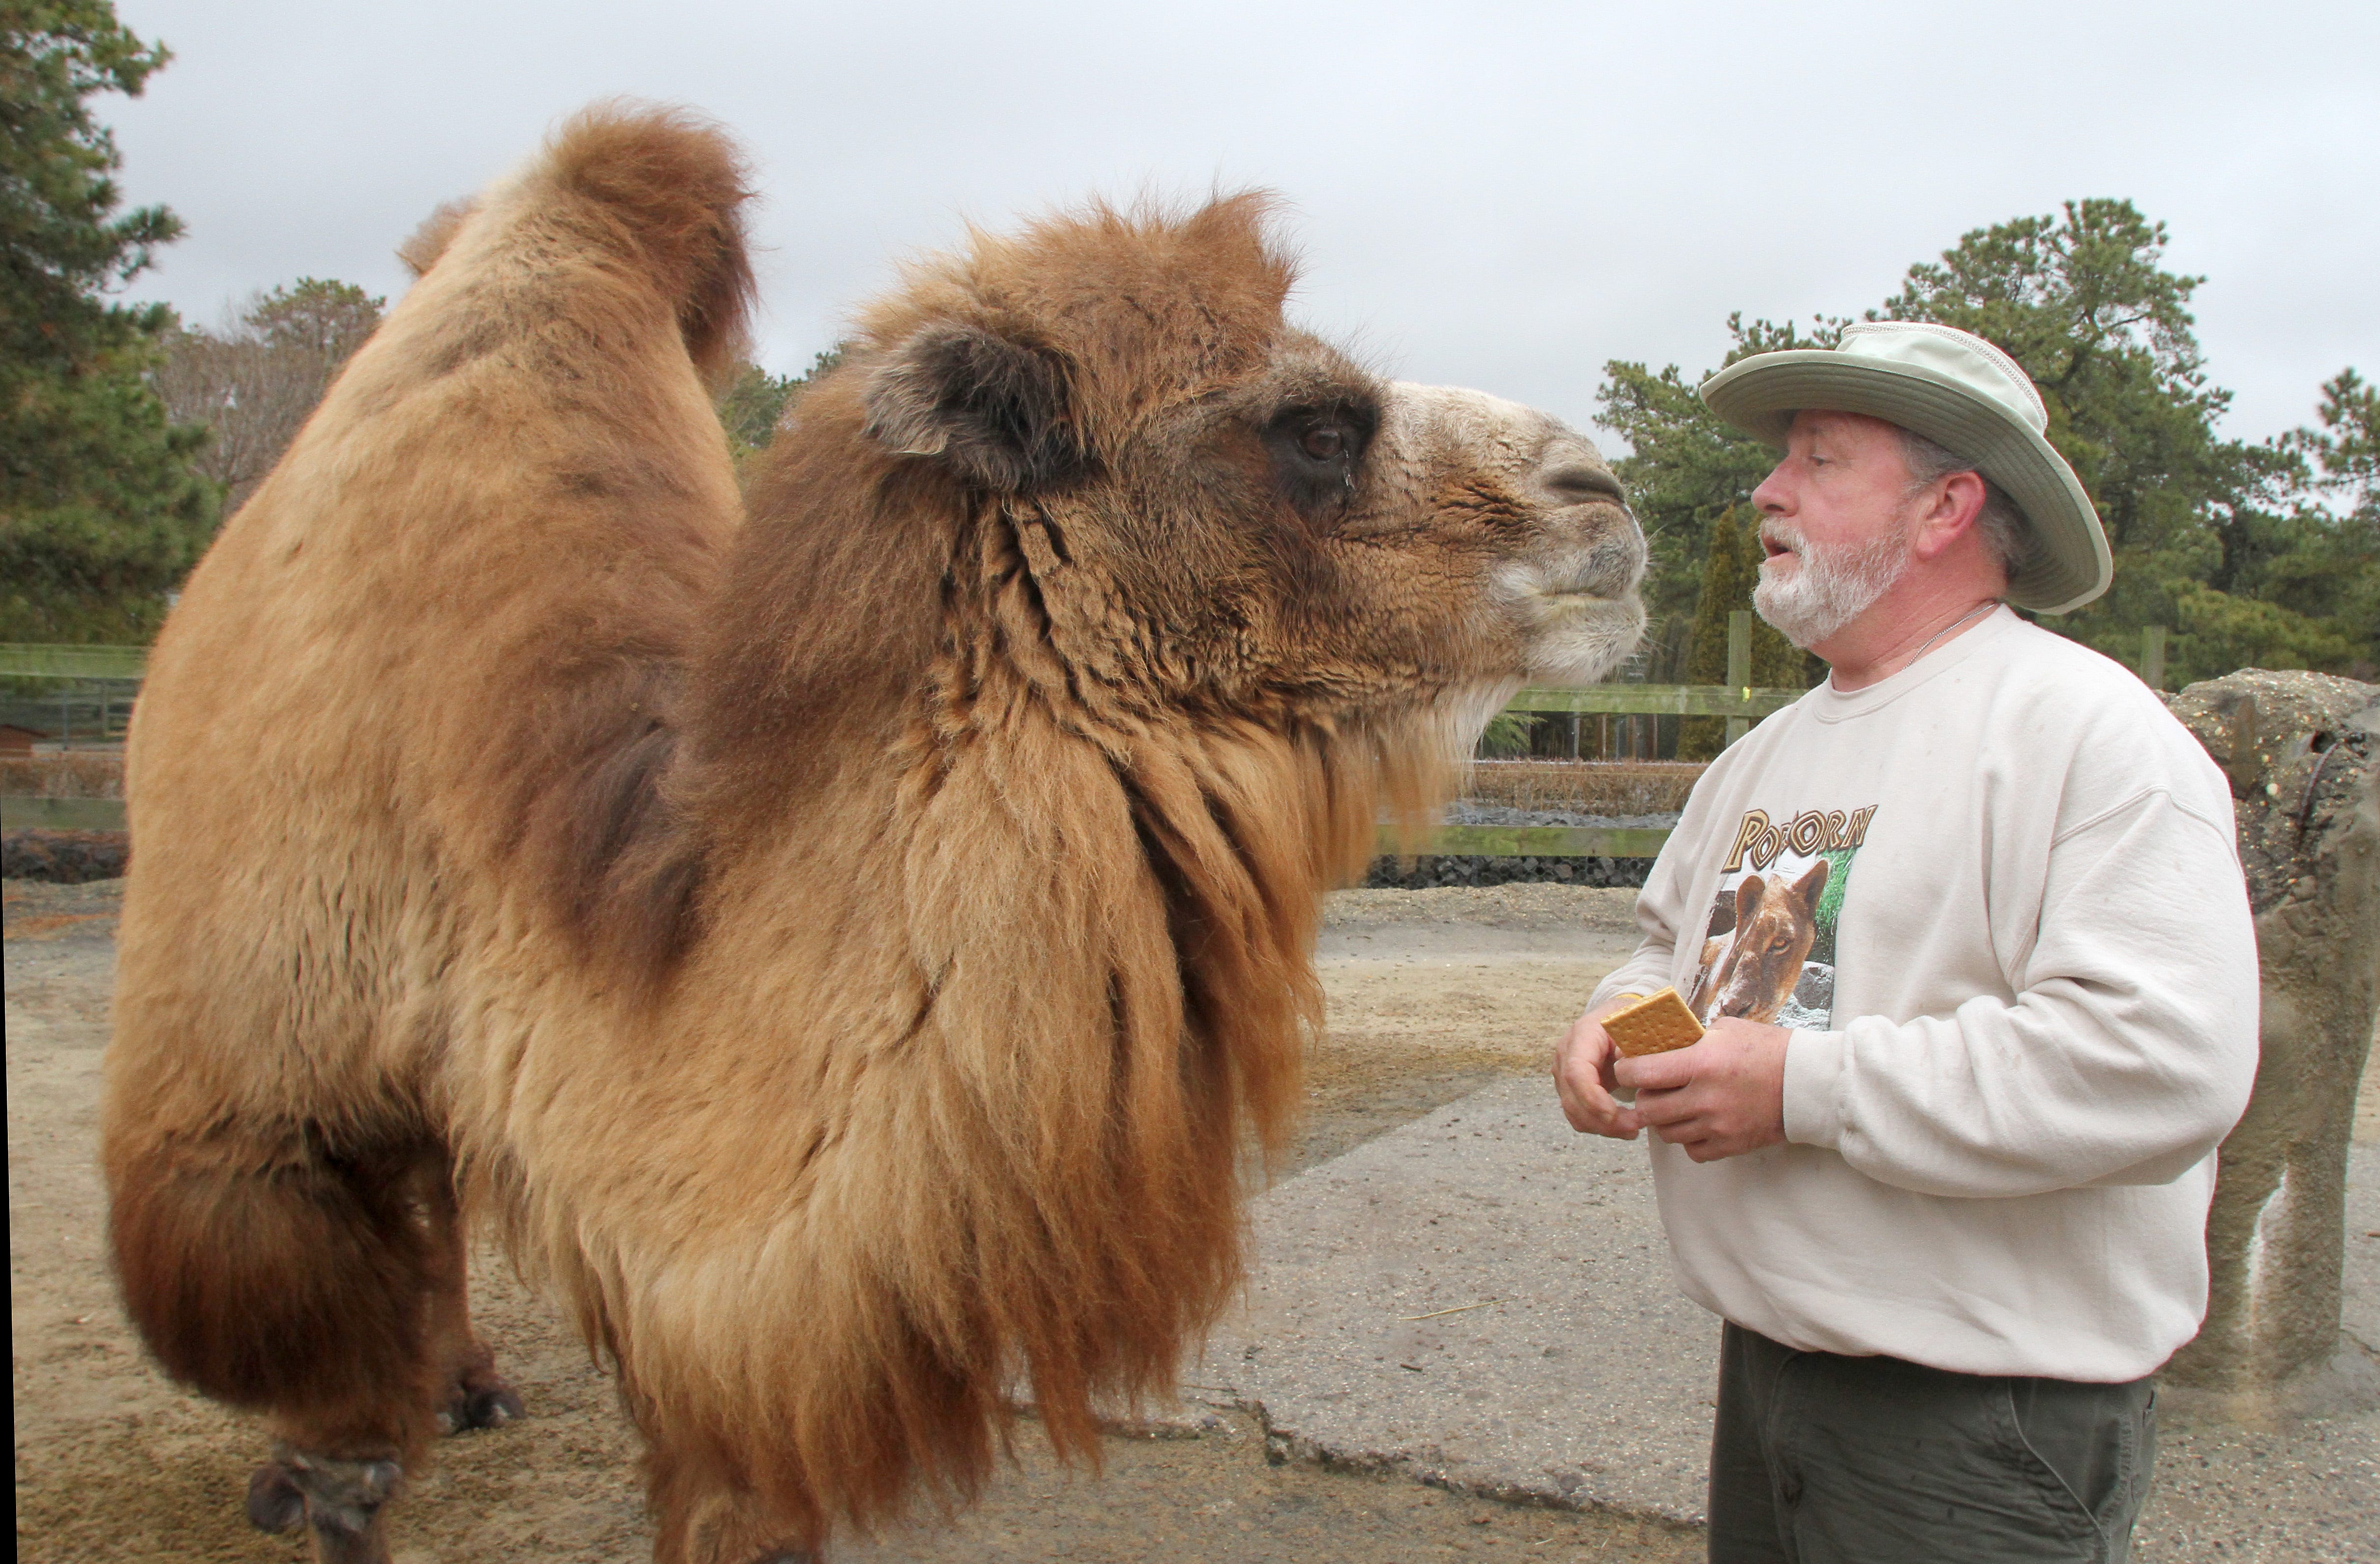 Princess the Camel of the Popcorn Park Zoo in Lacey Township is seen in this 2012 file photo as  John Bergmann, general manager of the Associated Humane Society/Popcorn Park Zoo fed her crackers. Asbury Park Press file photo 1/27/2012